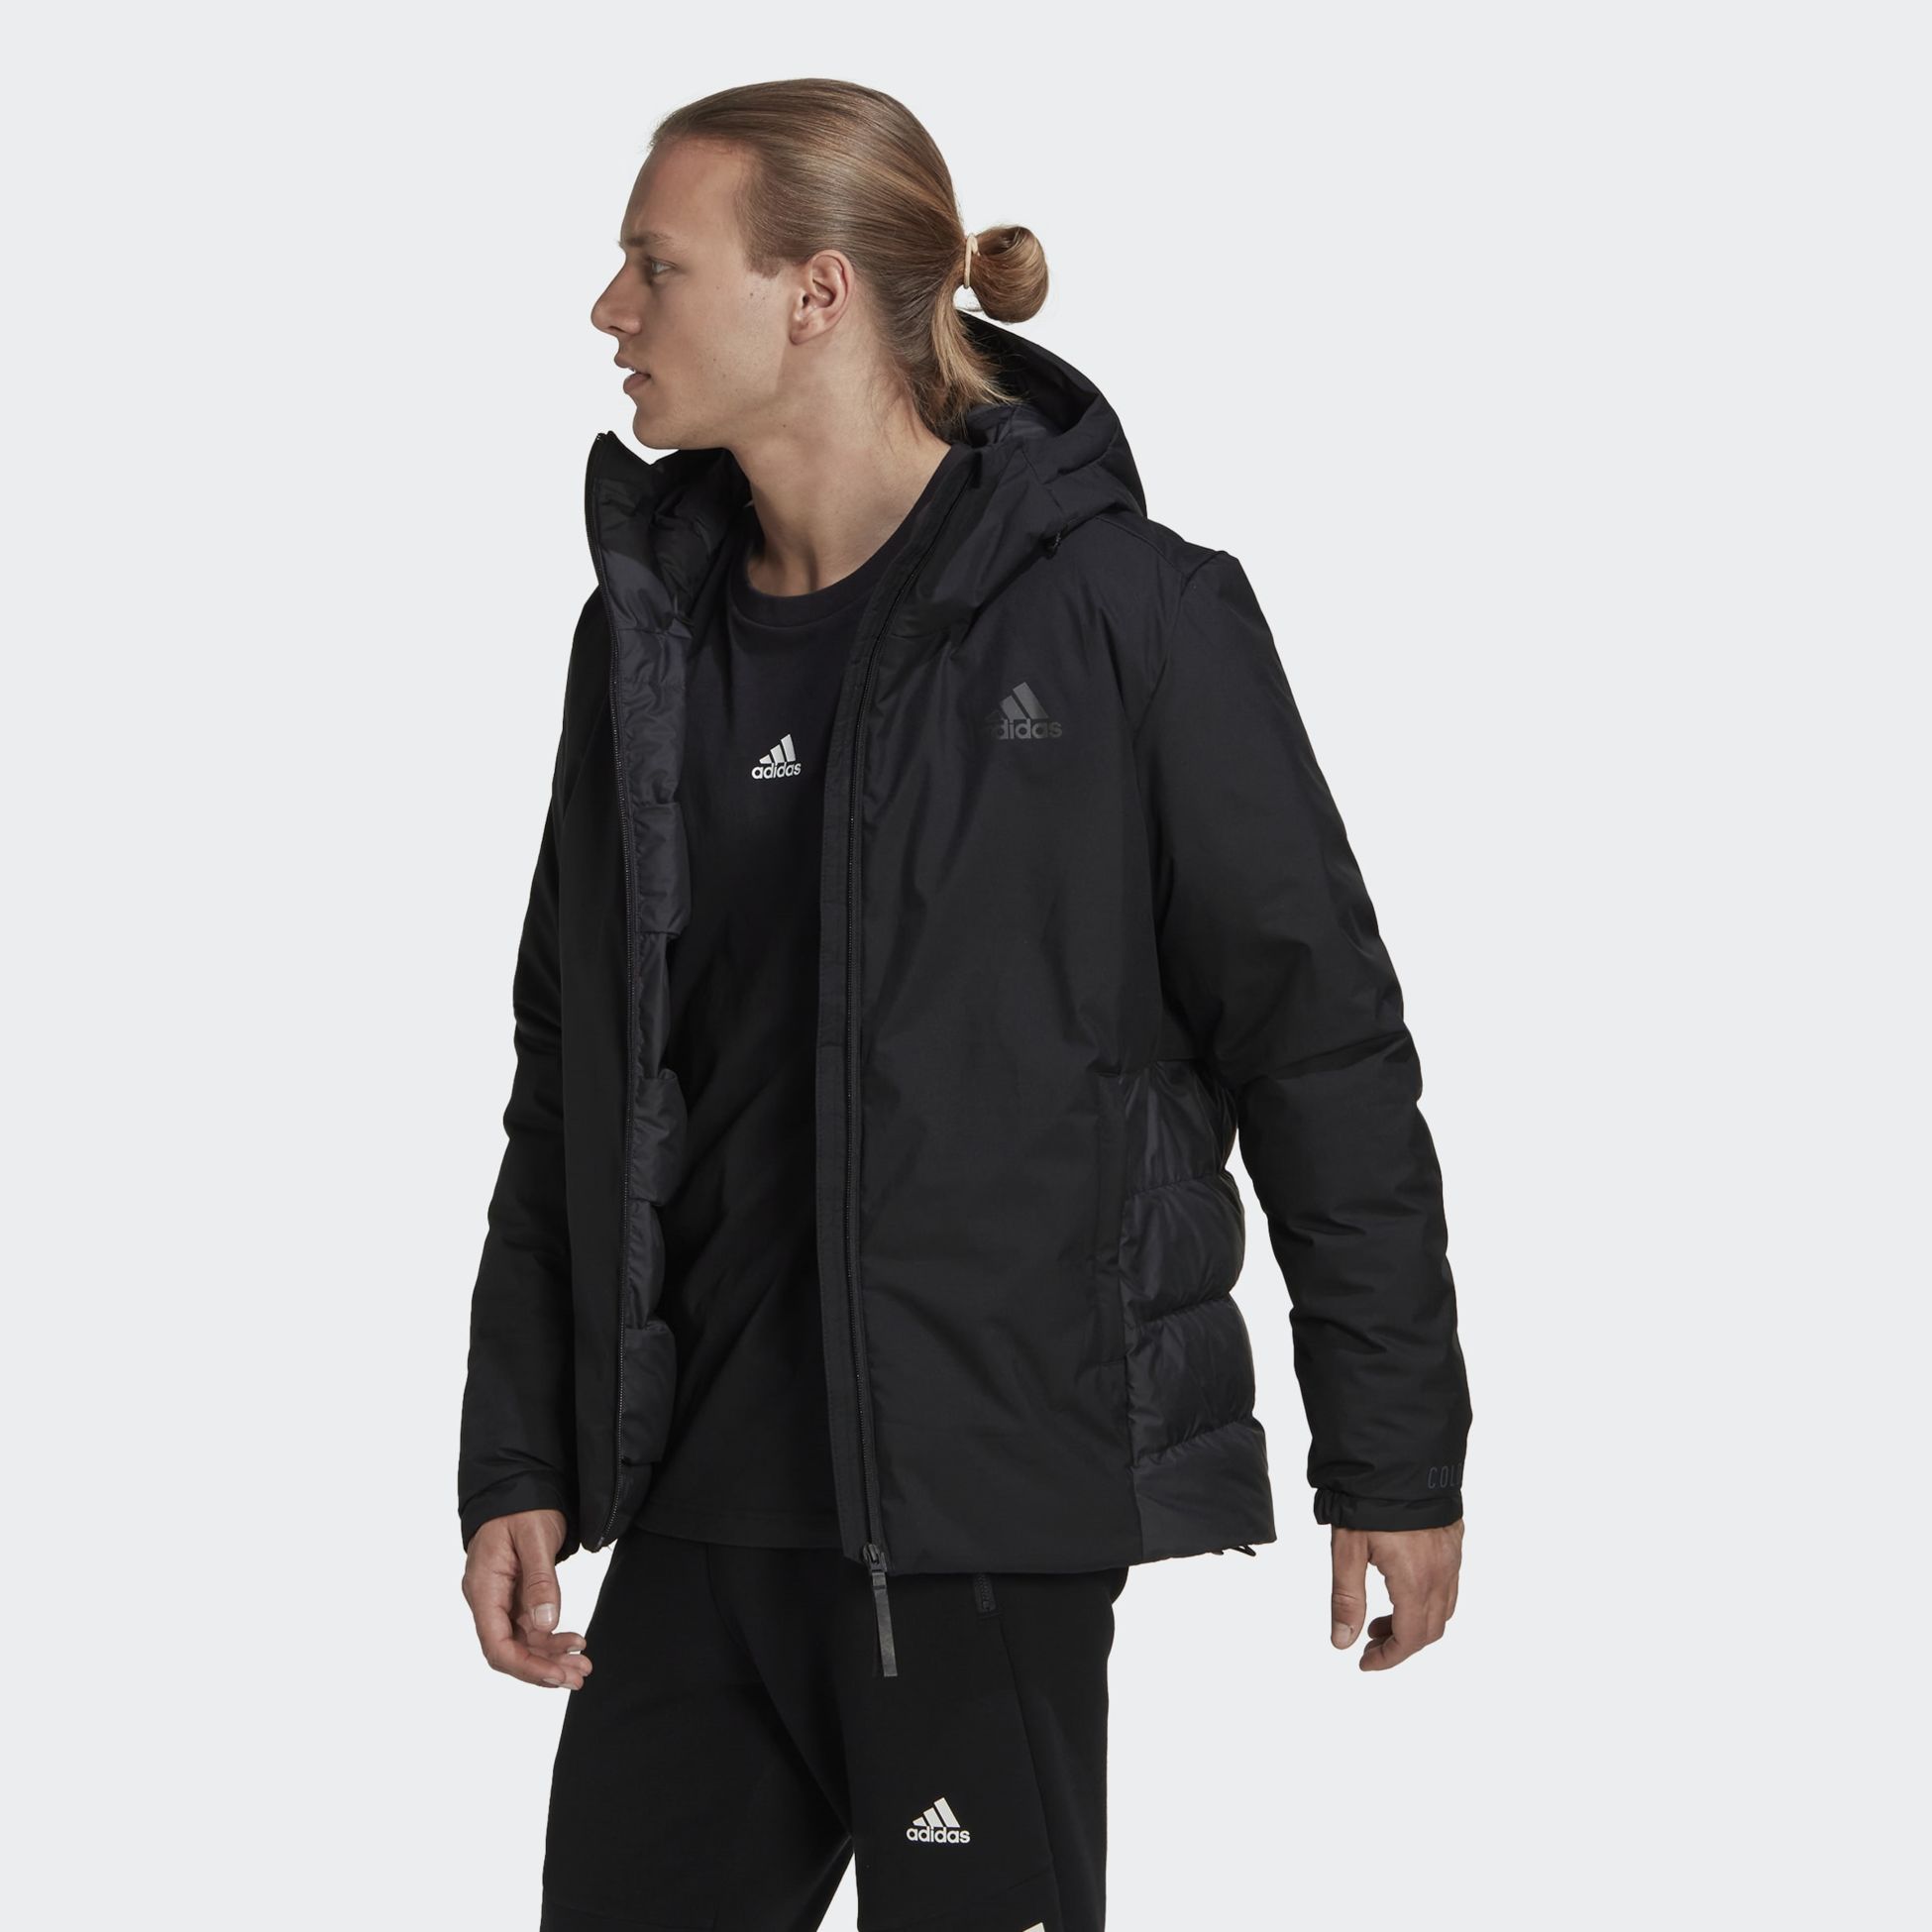 ADIDAS, Traveer COLD.RDY Jacket